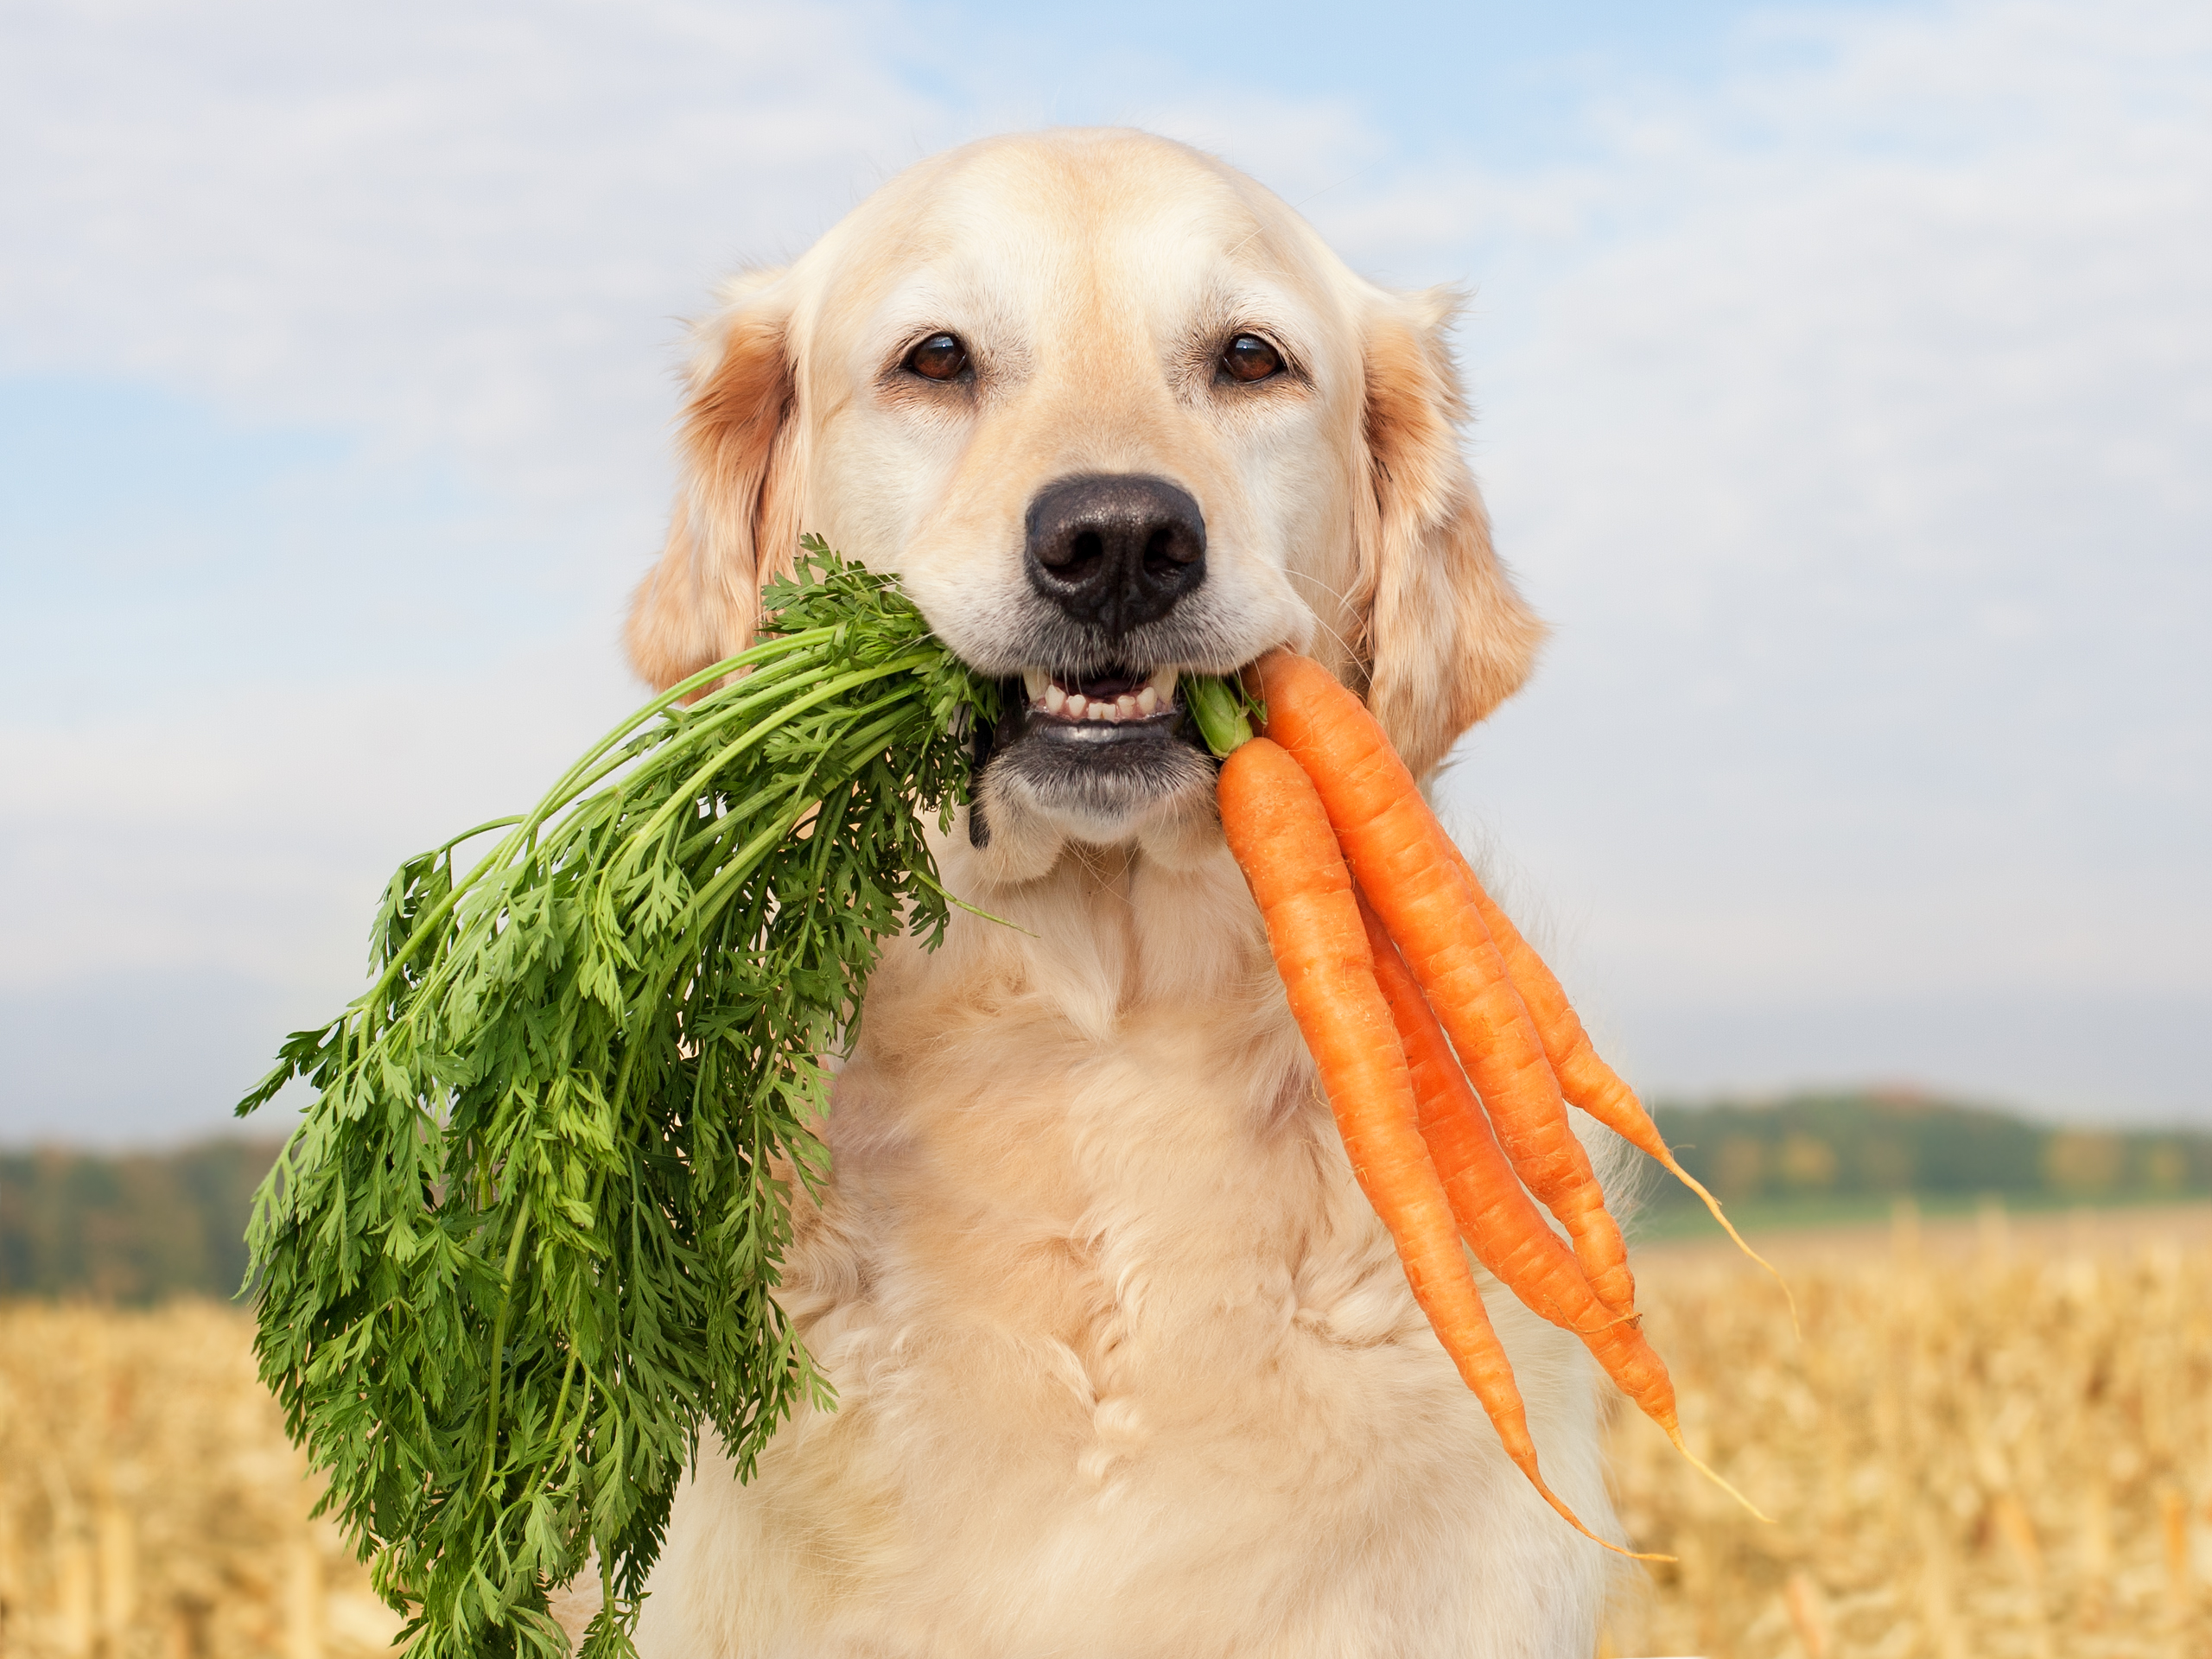 Golden retriever with a mouth full of carrots